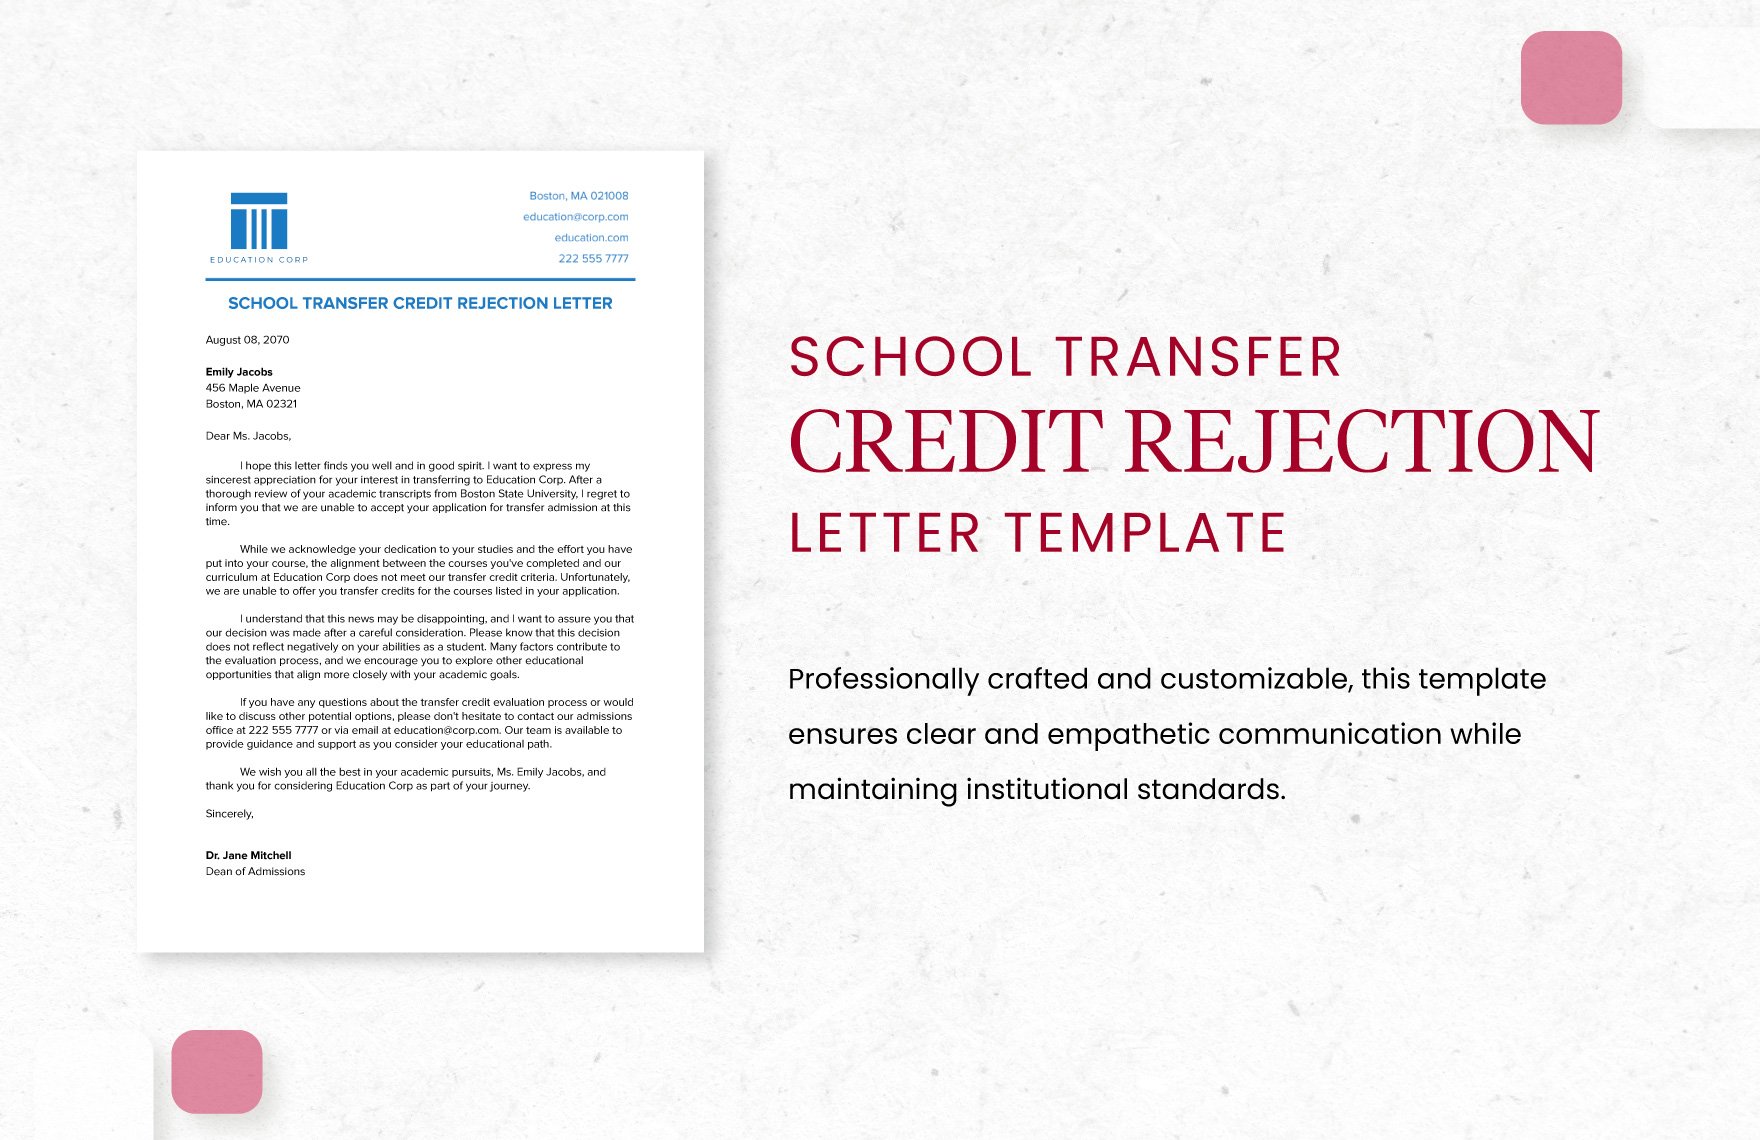 School Transfer Credit Rejection Letter Template